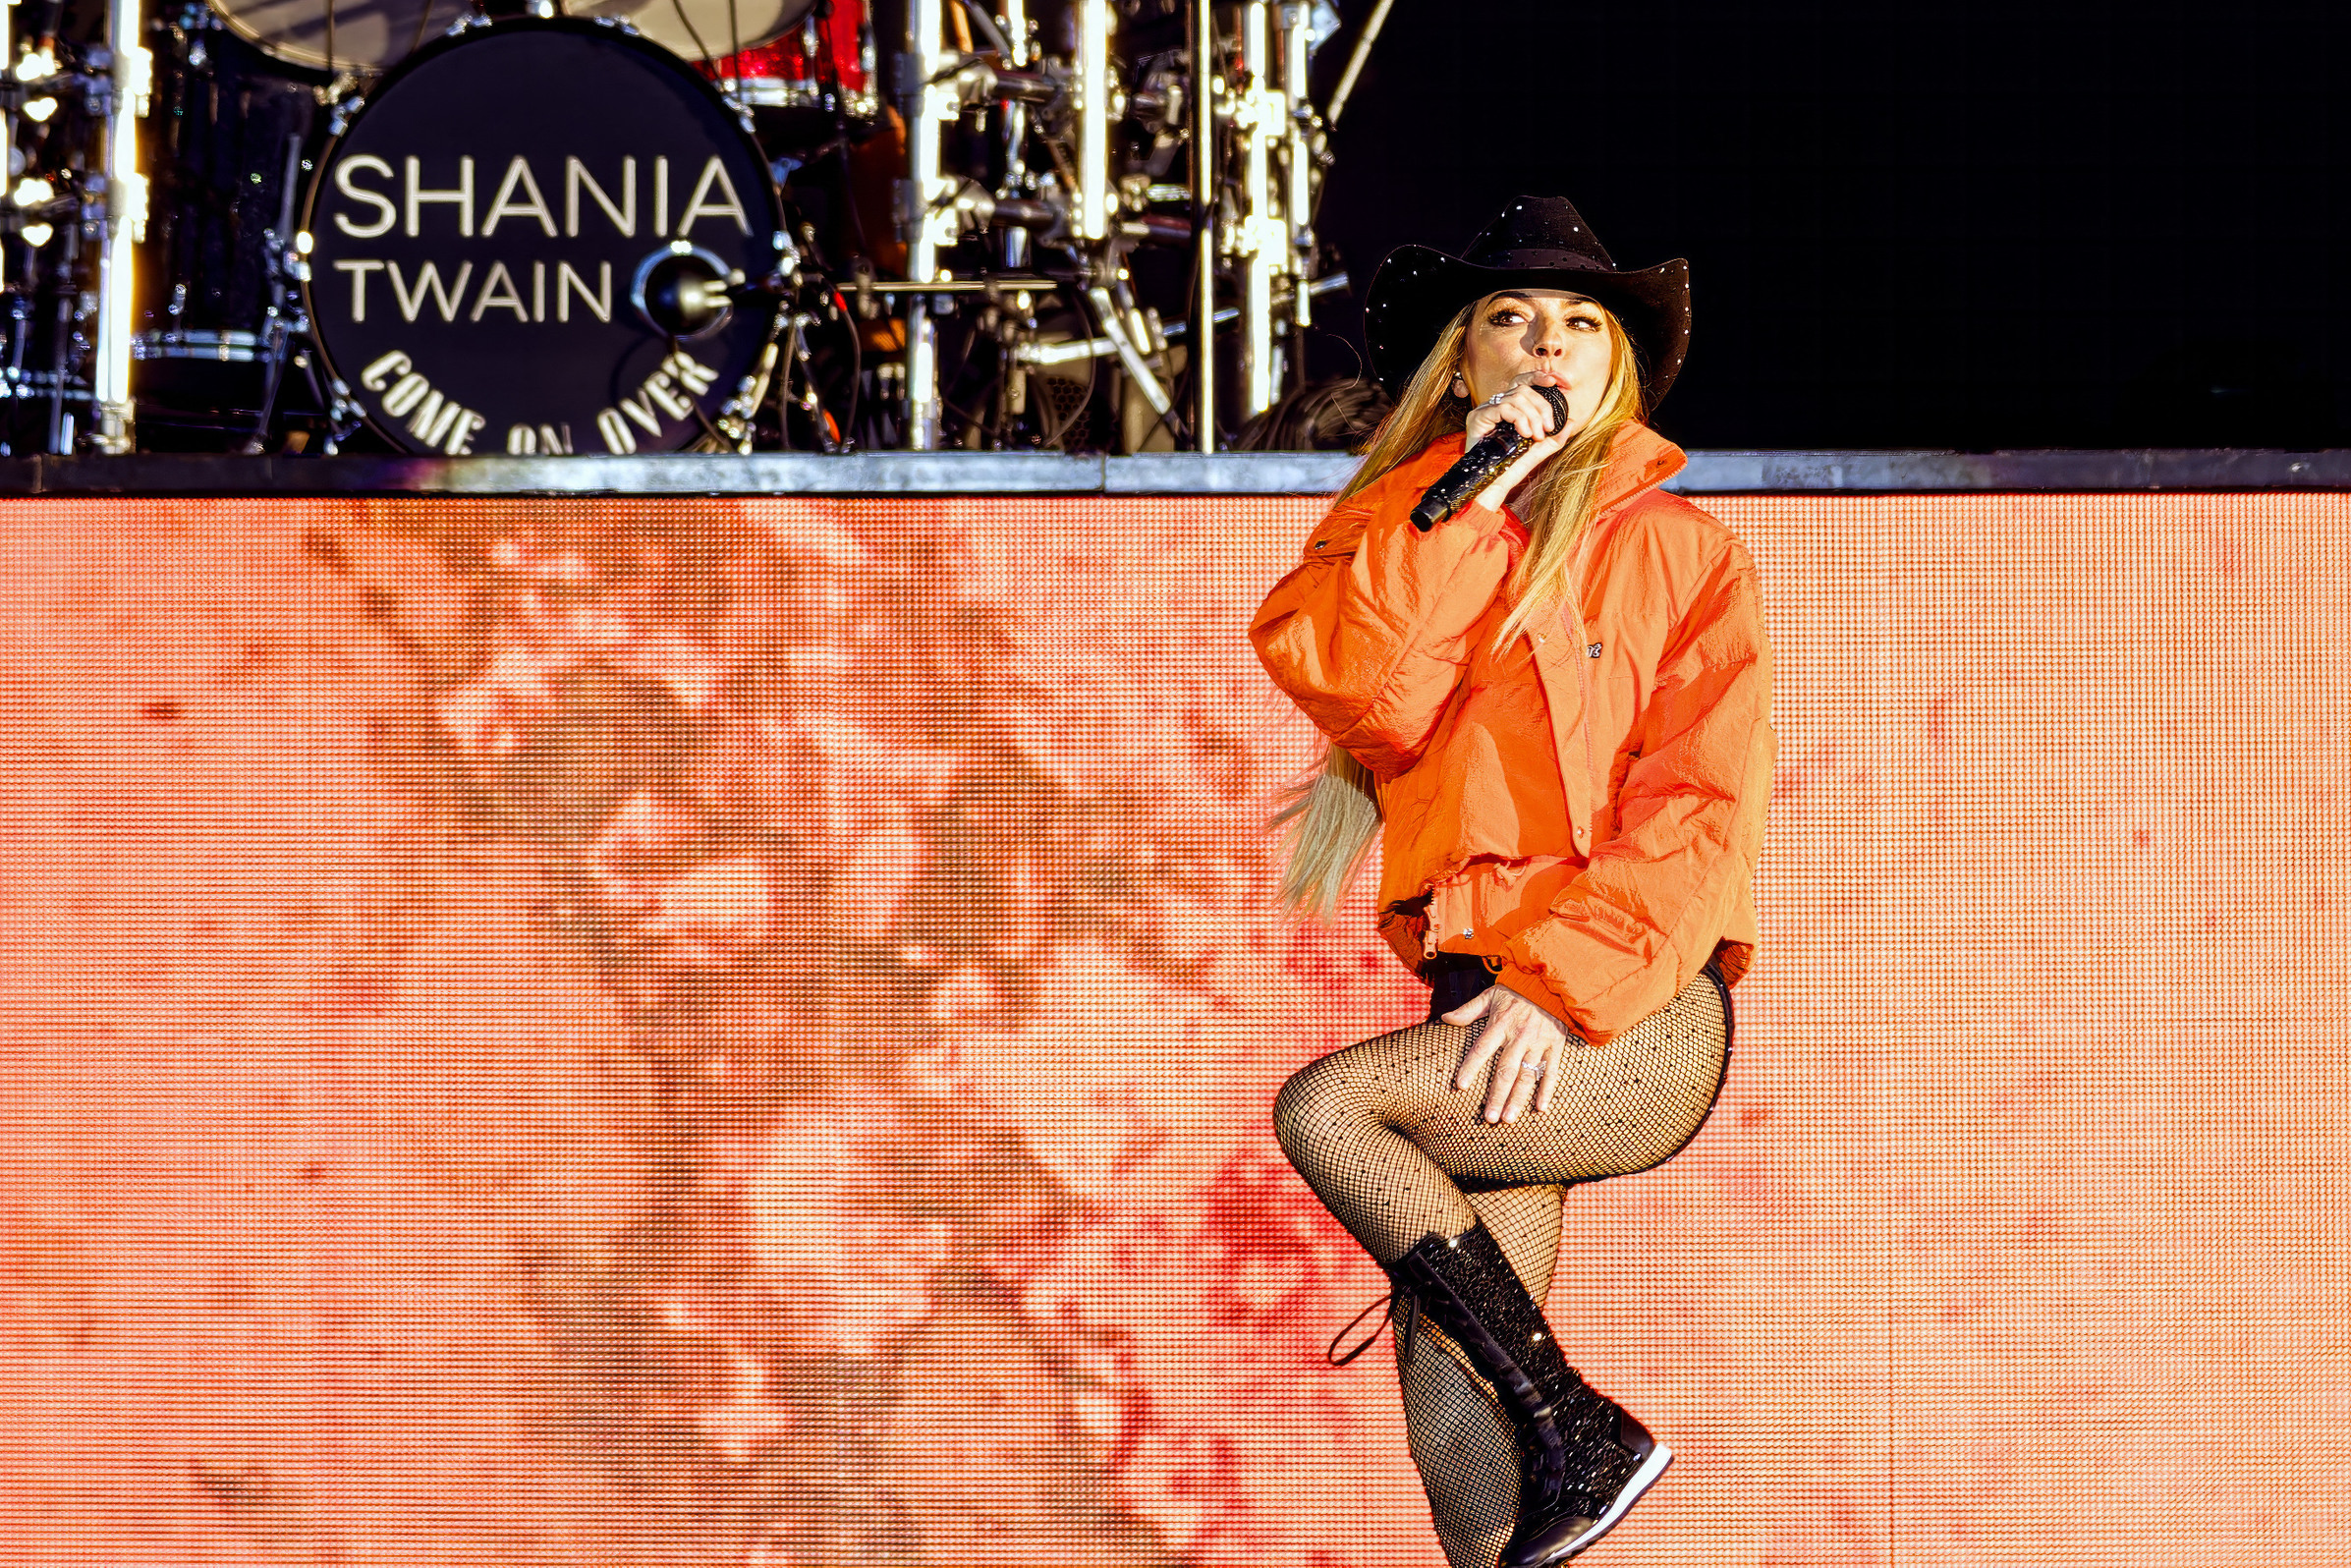 Shania Twain, seen on stage at Lytham Festival in the United Kingdom, faced backlash for her over the top stage outfits